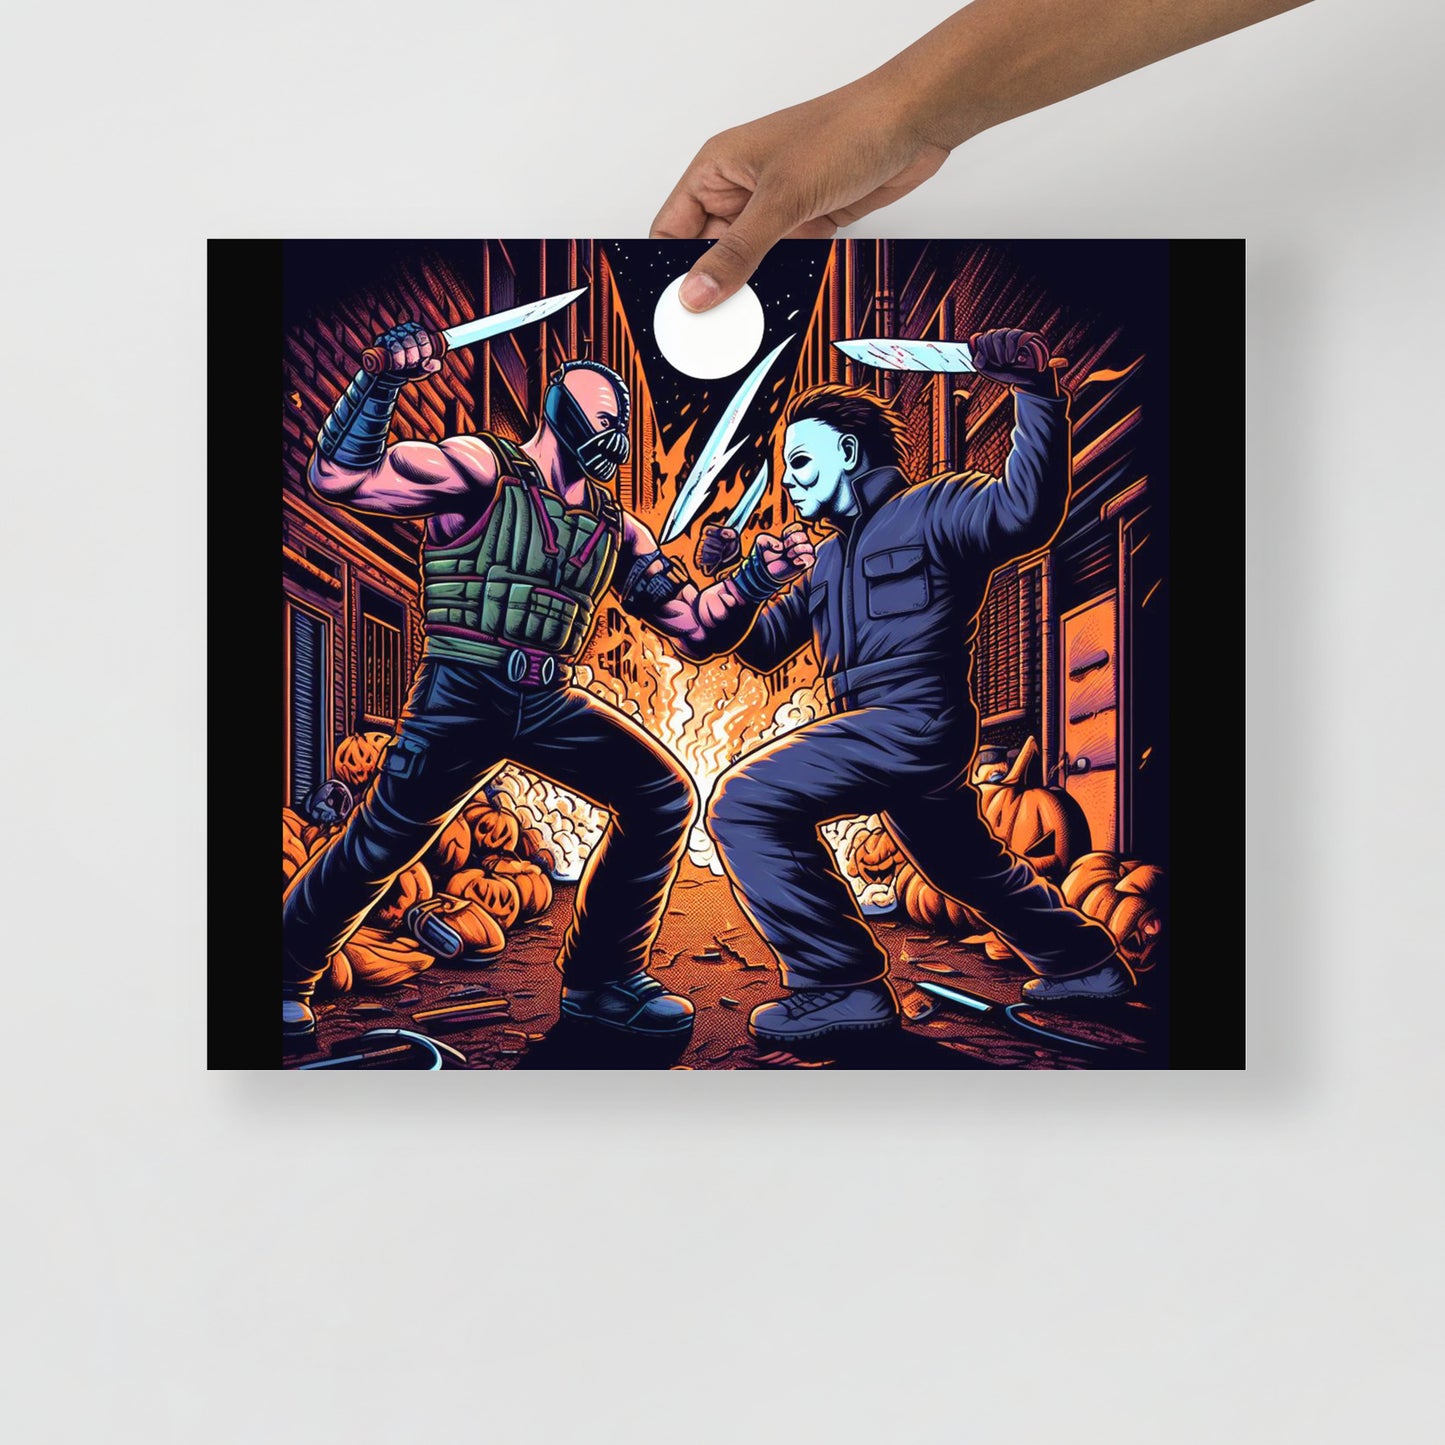 Bane vs Michael Myers Poster - The Battle of Unstoppable Forces